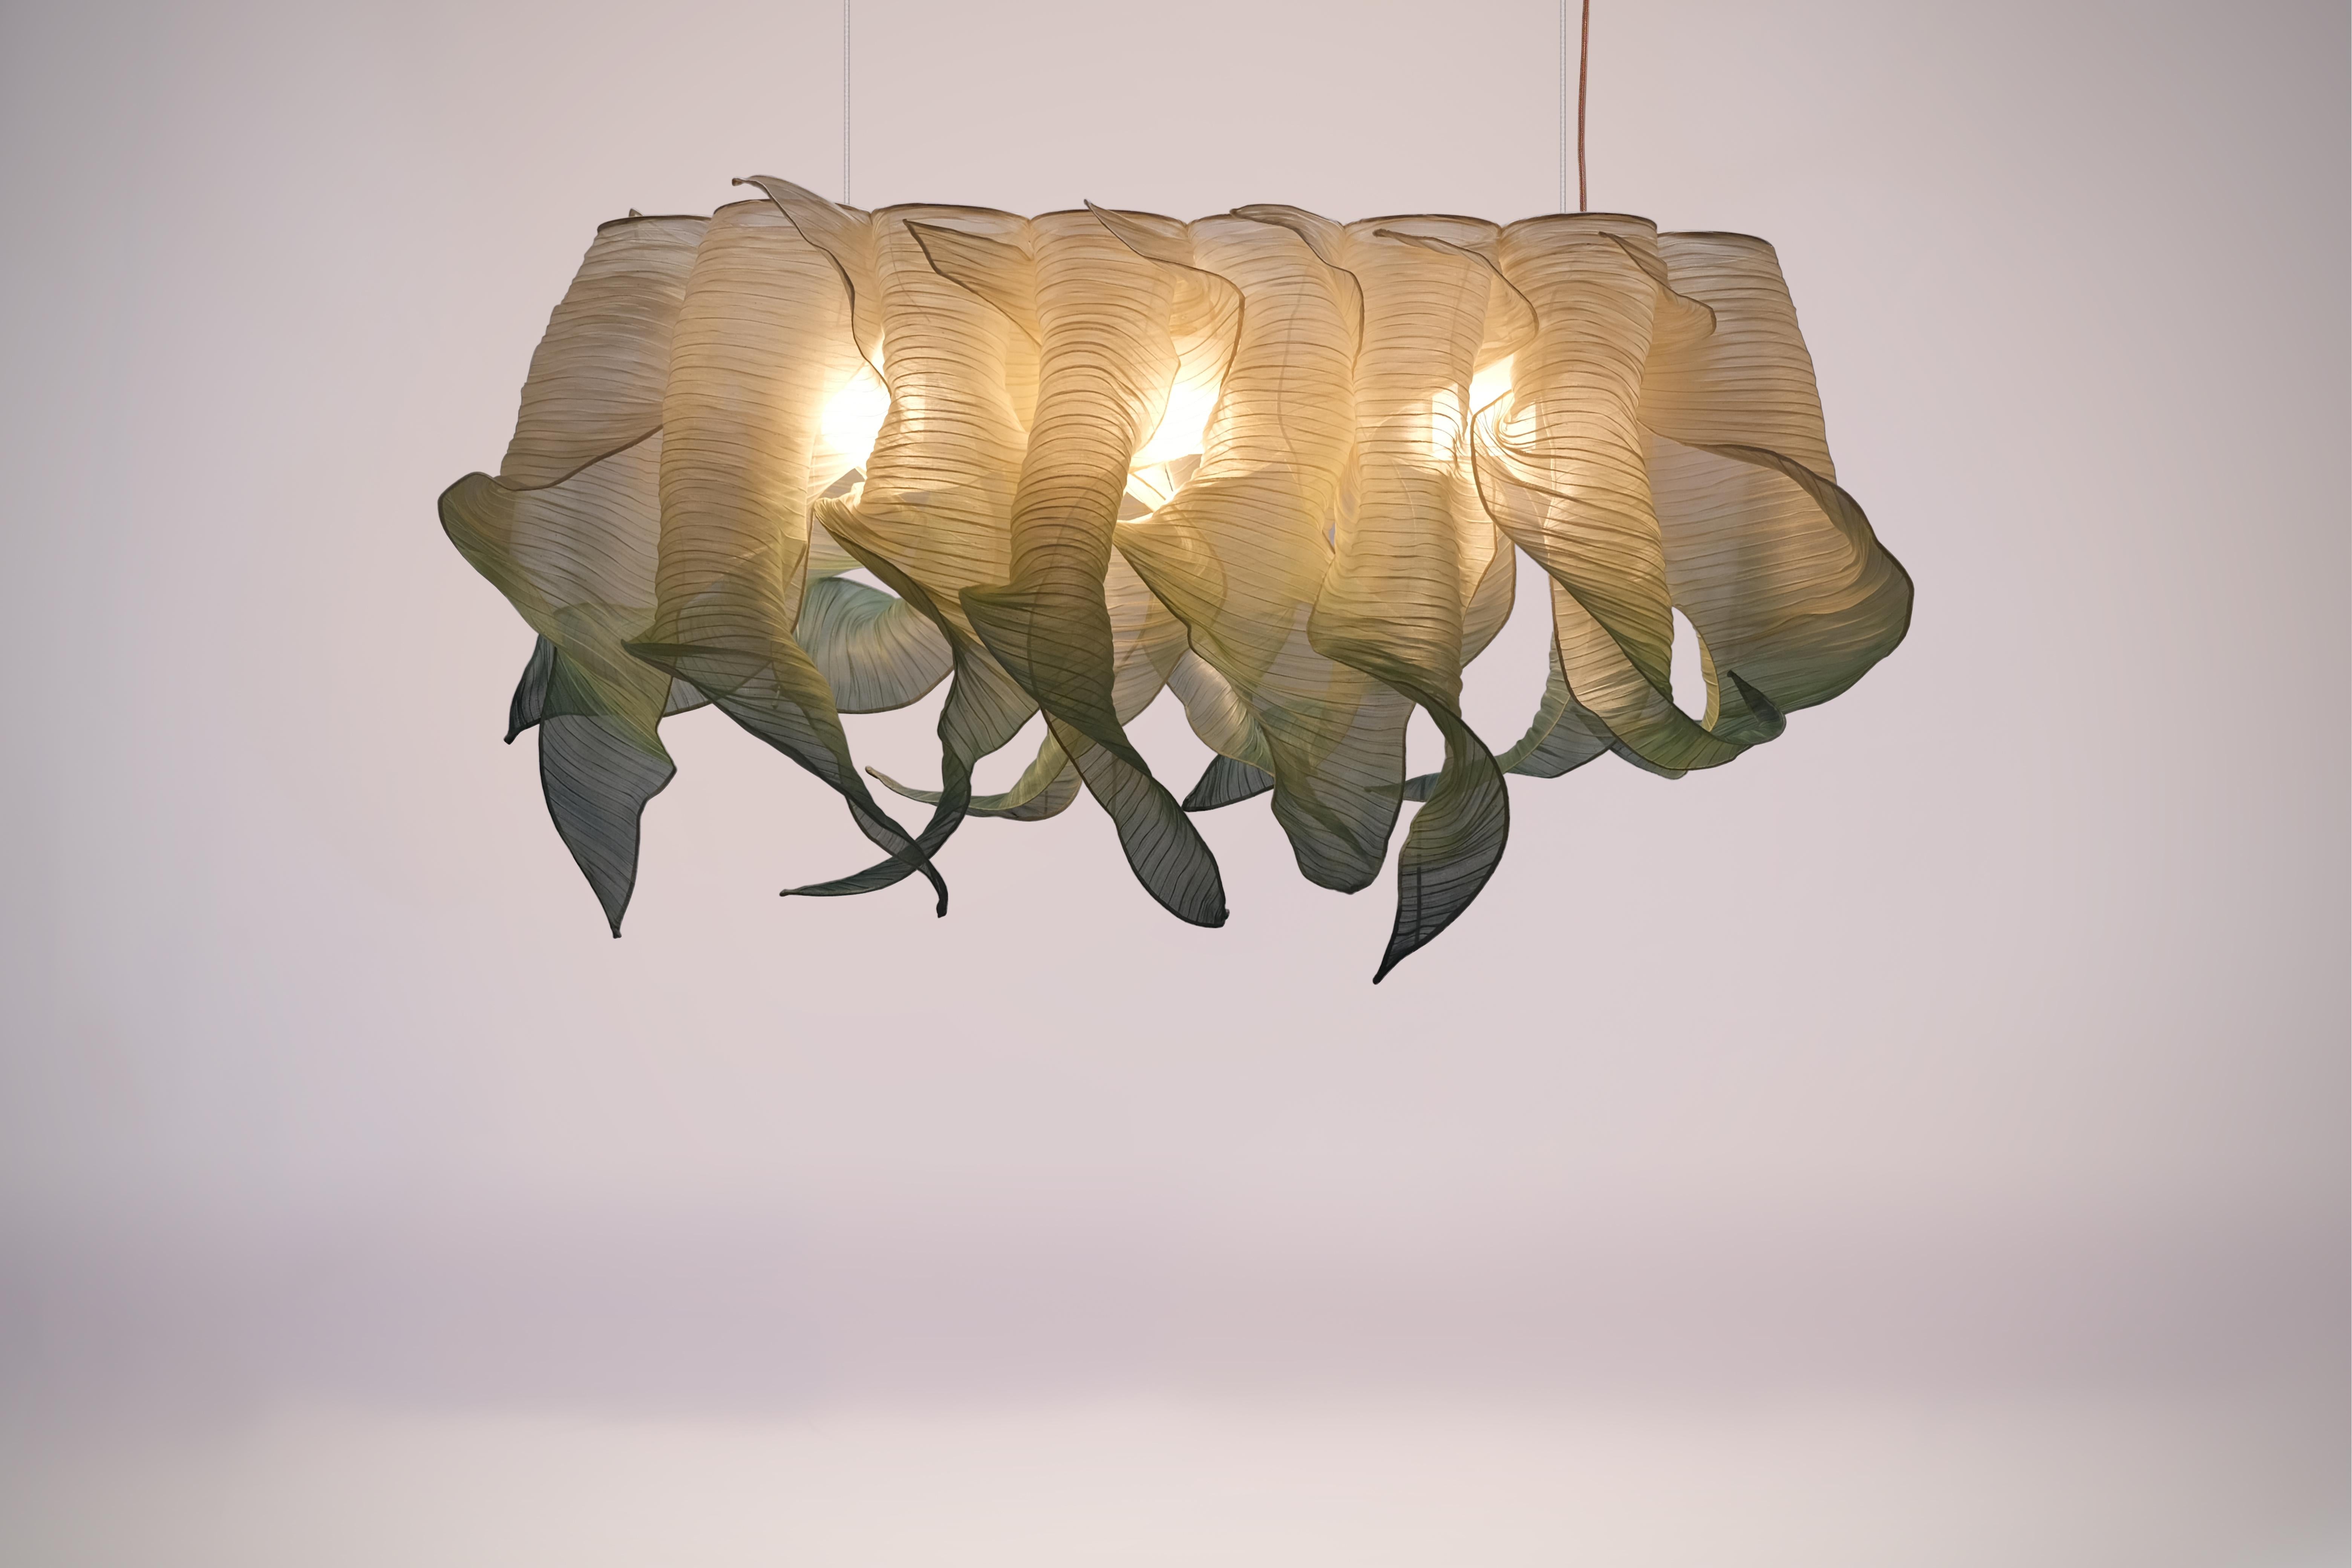 Providing soft light in an organic and unique design, the Nebula Lamp draws its inspiration from the interstellar clouds of dust and gas. Entirely handcrafted of Banaca (banana-abaca), a fiber from the Philippines woven by a community of weavers in